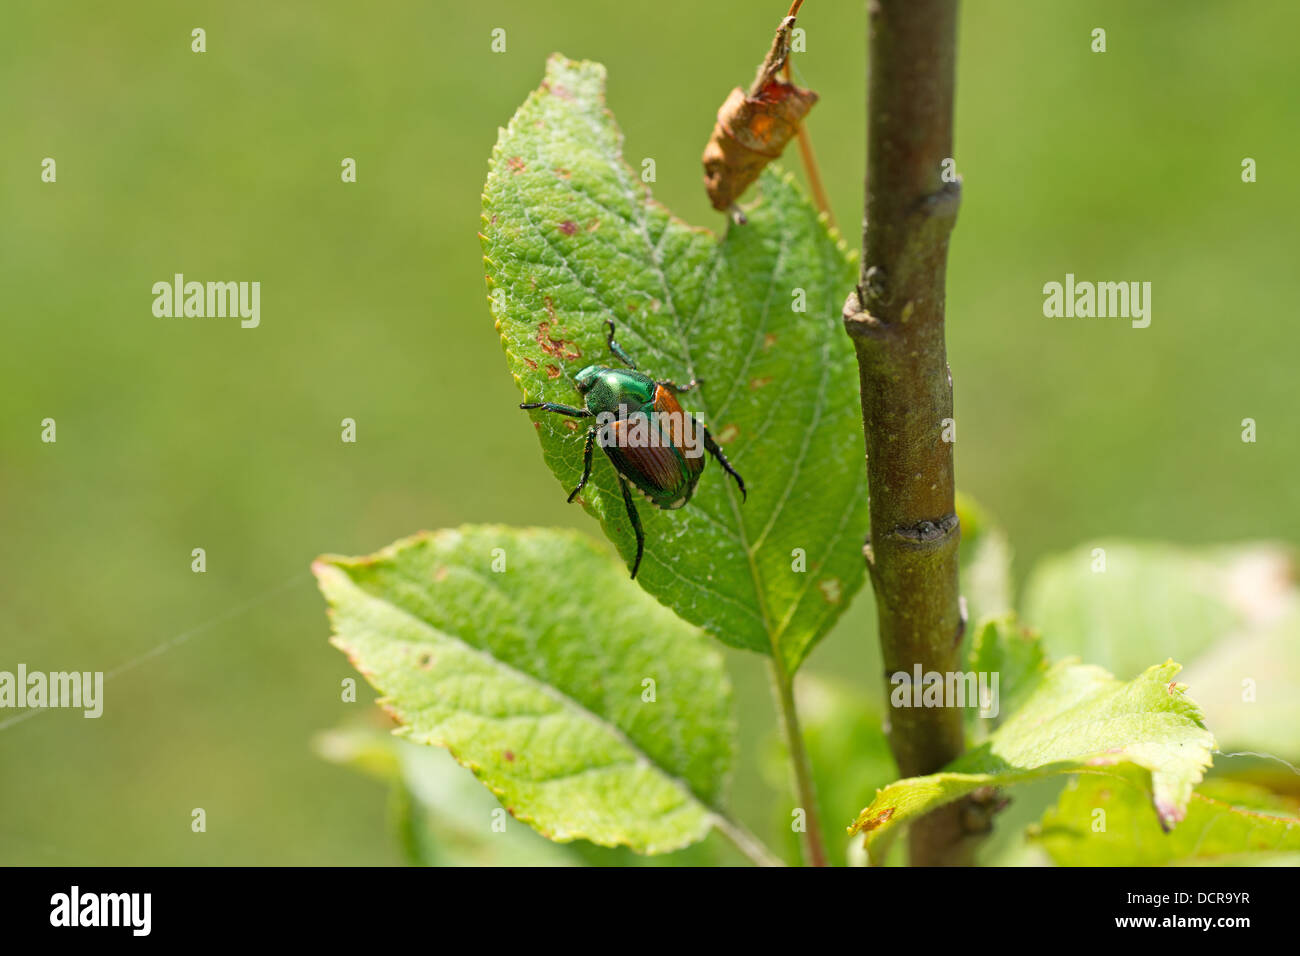 Close view of a lone Japanese beetle eating a small apple tree leaf. Stock Photo